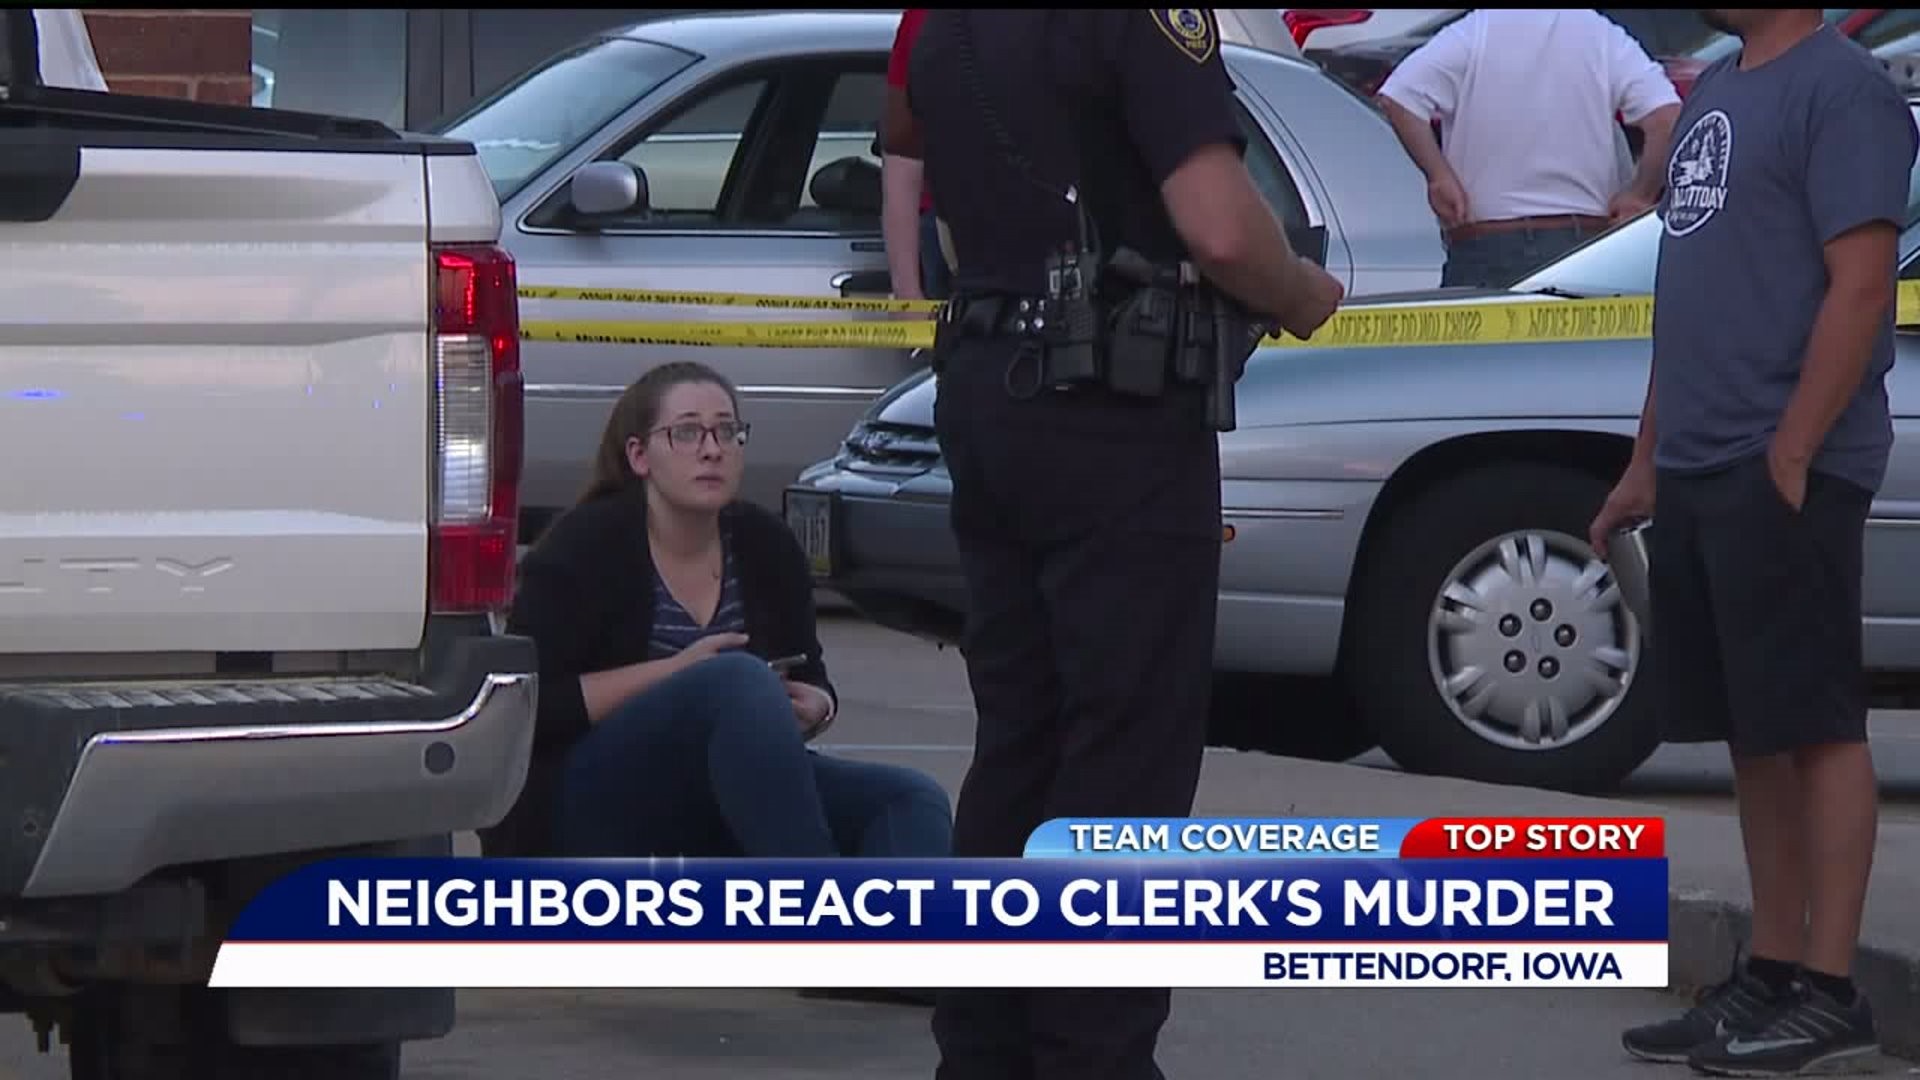 Clerk fatally shot at gas station in Bettendorf